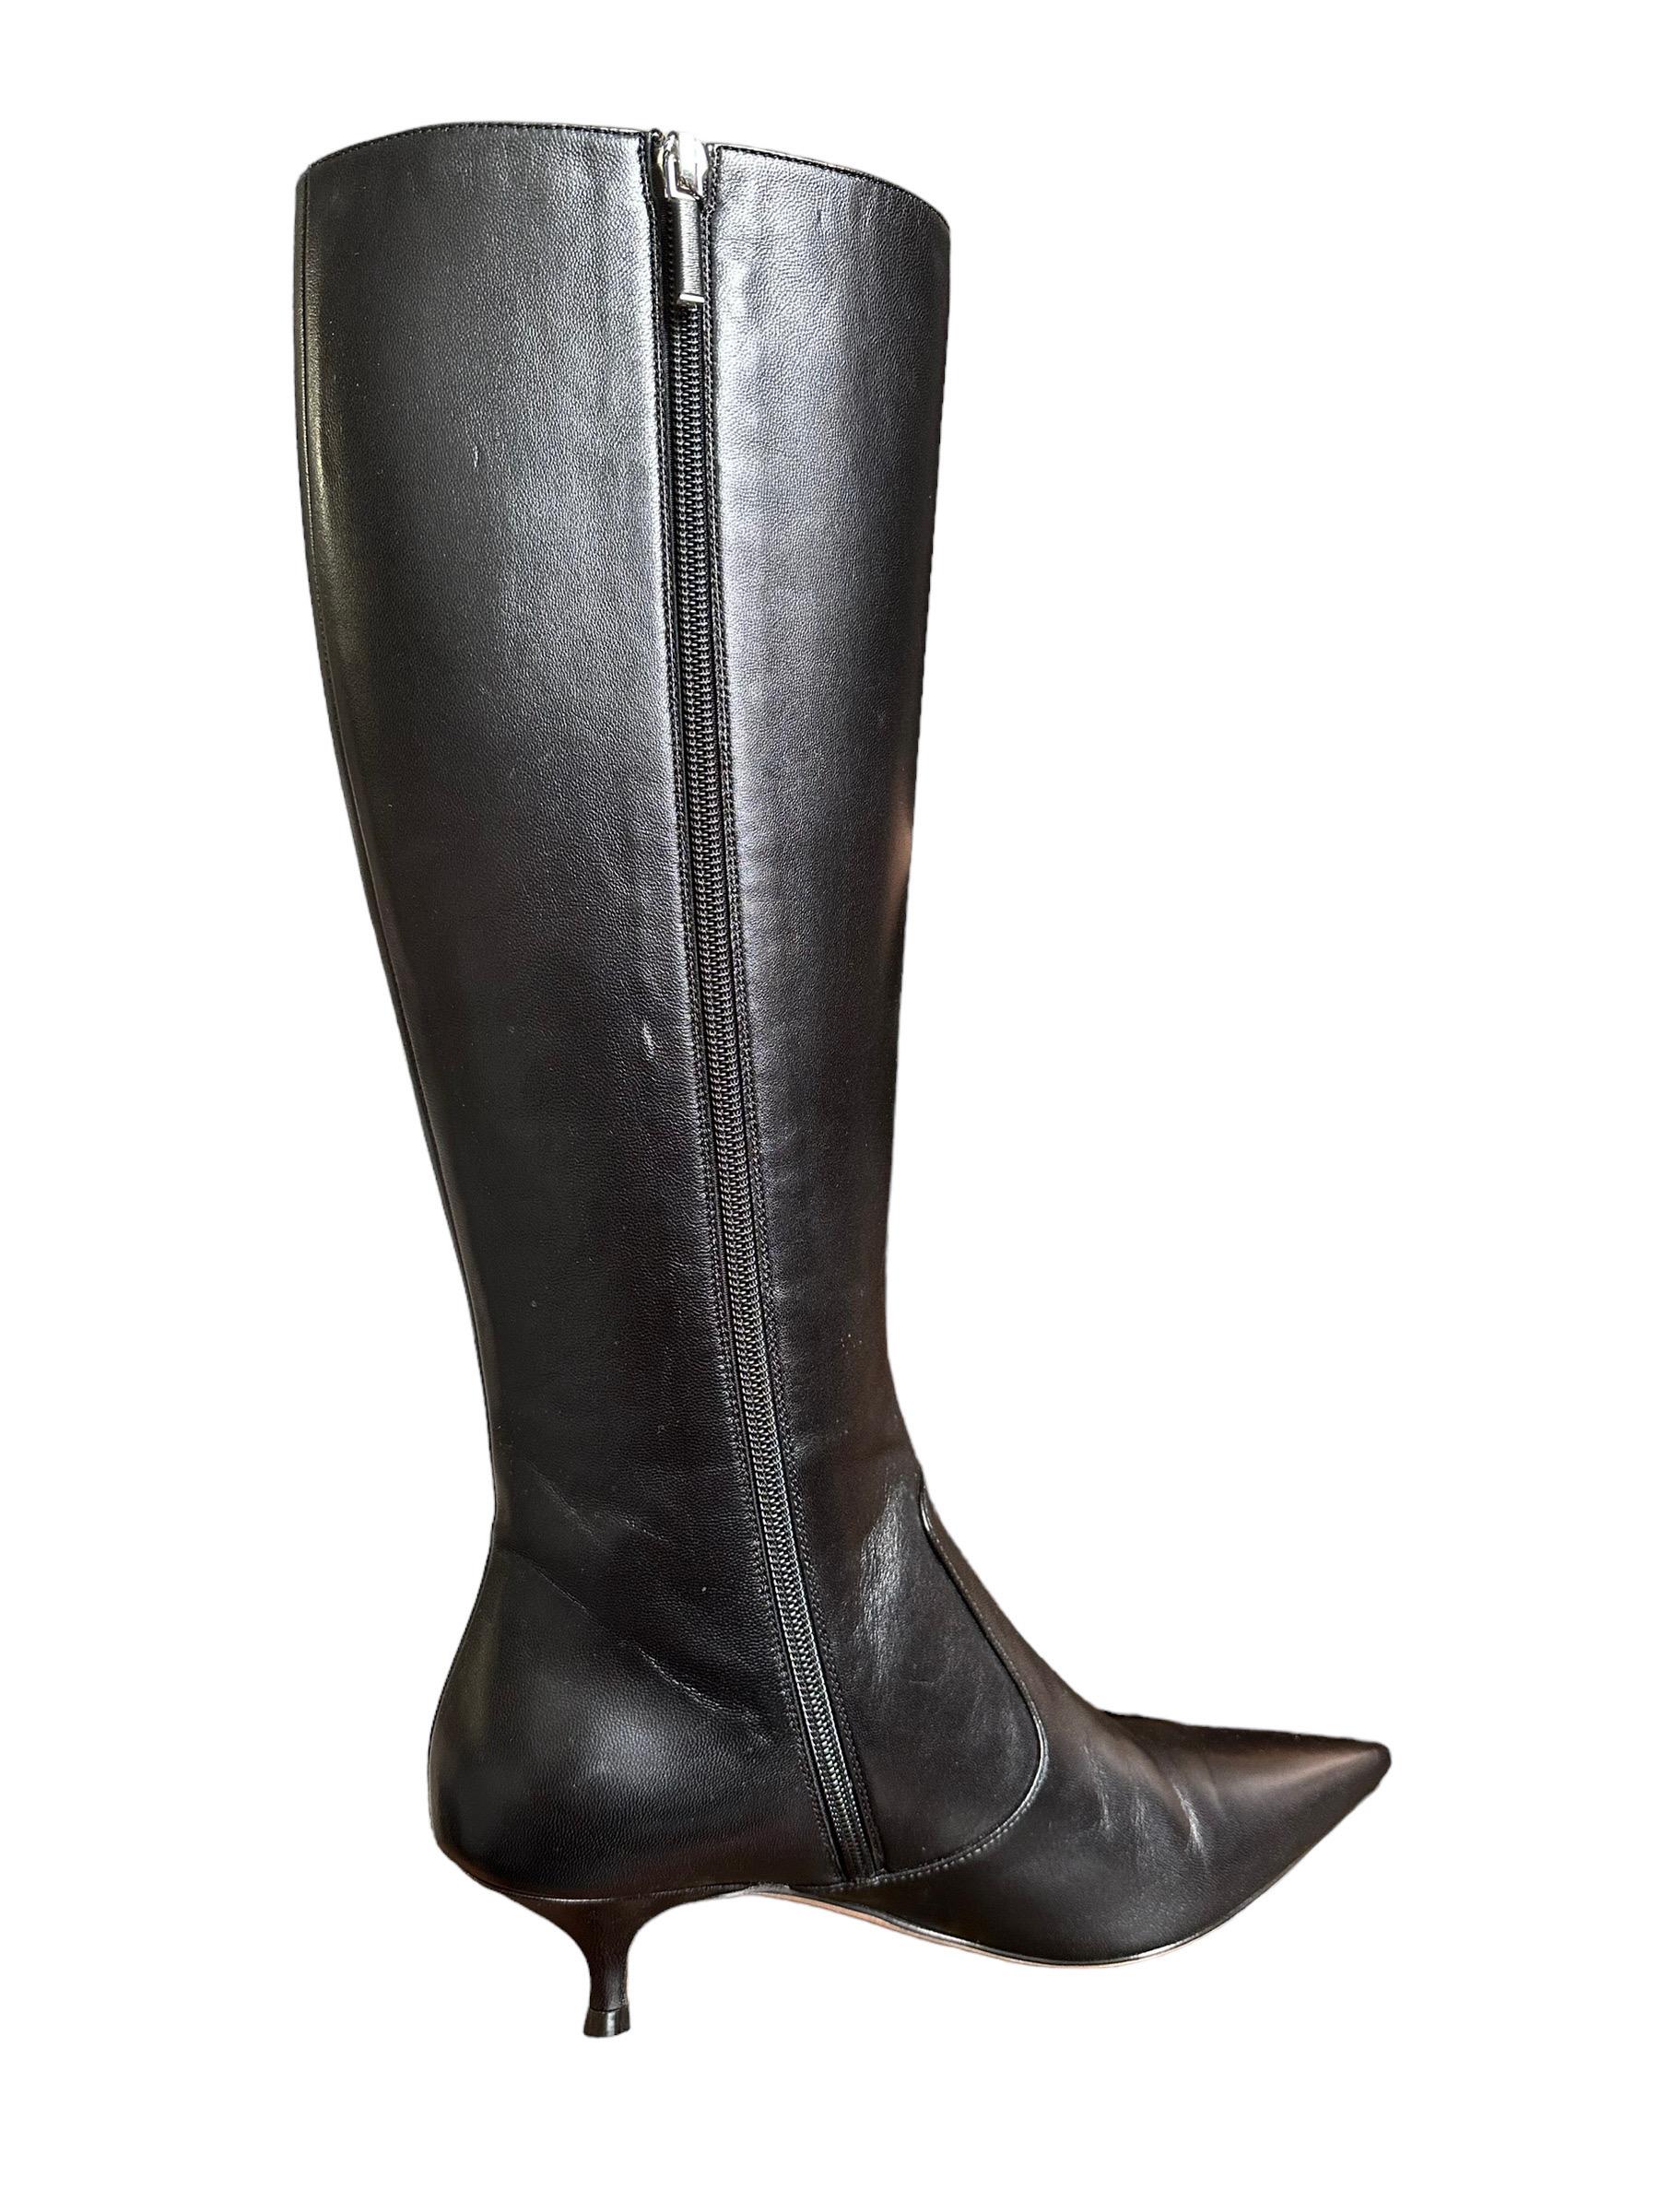 Dior Boots Black Leather Low Heels 5